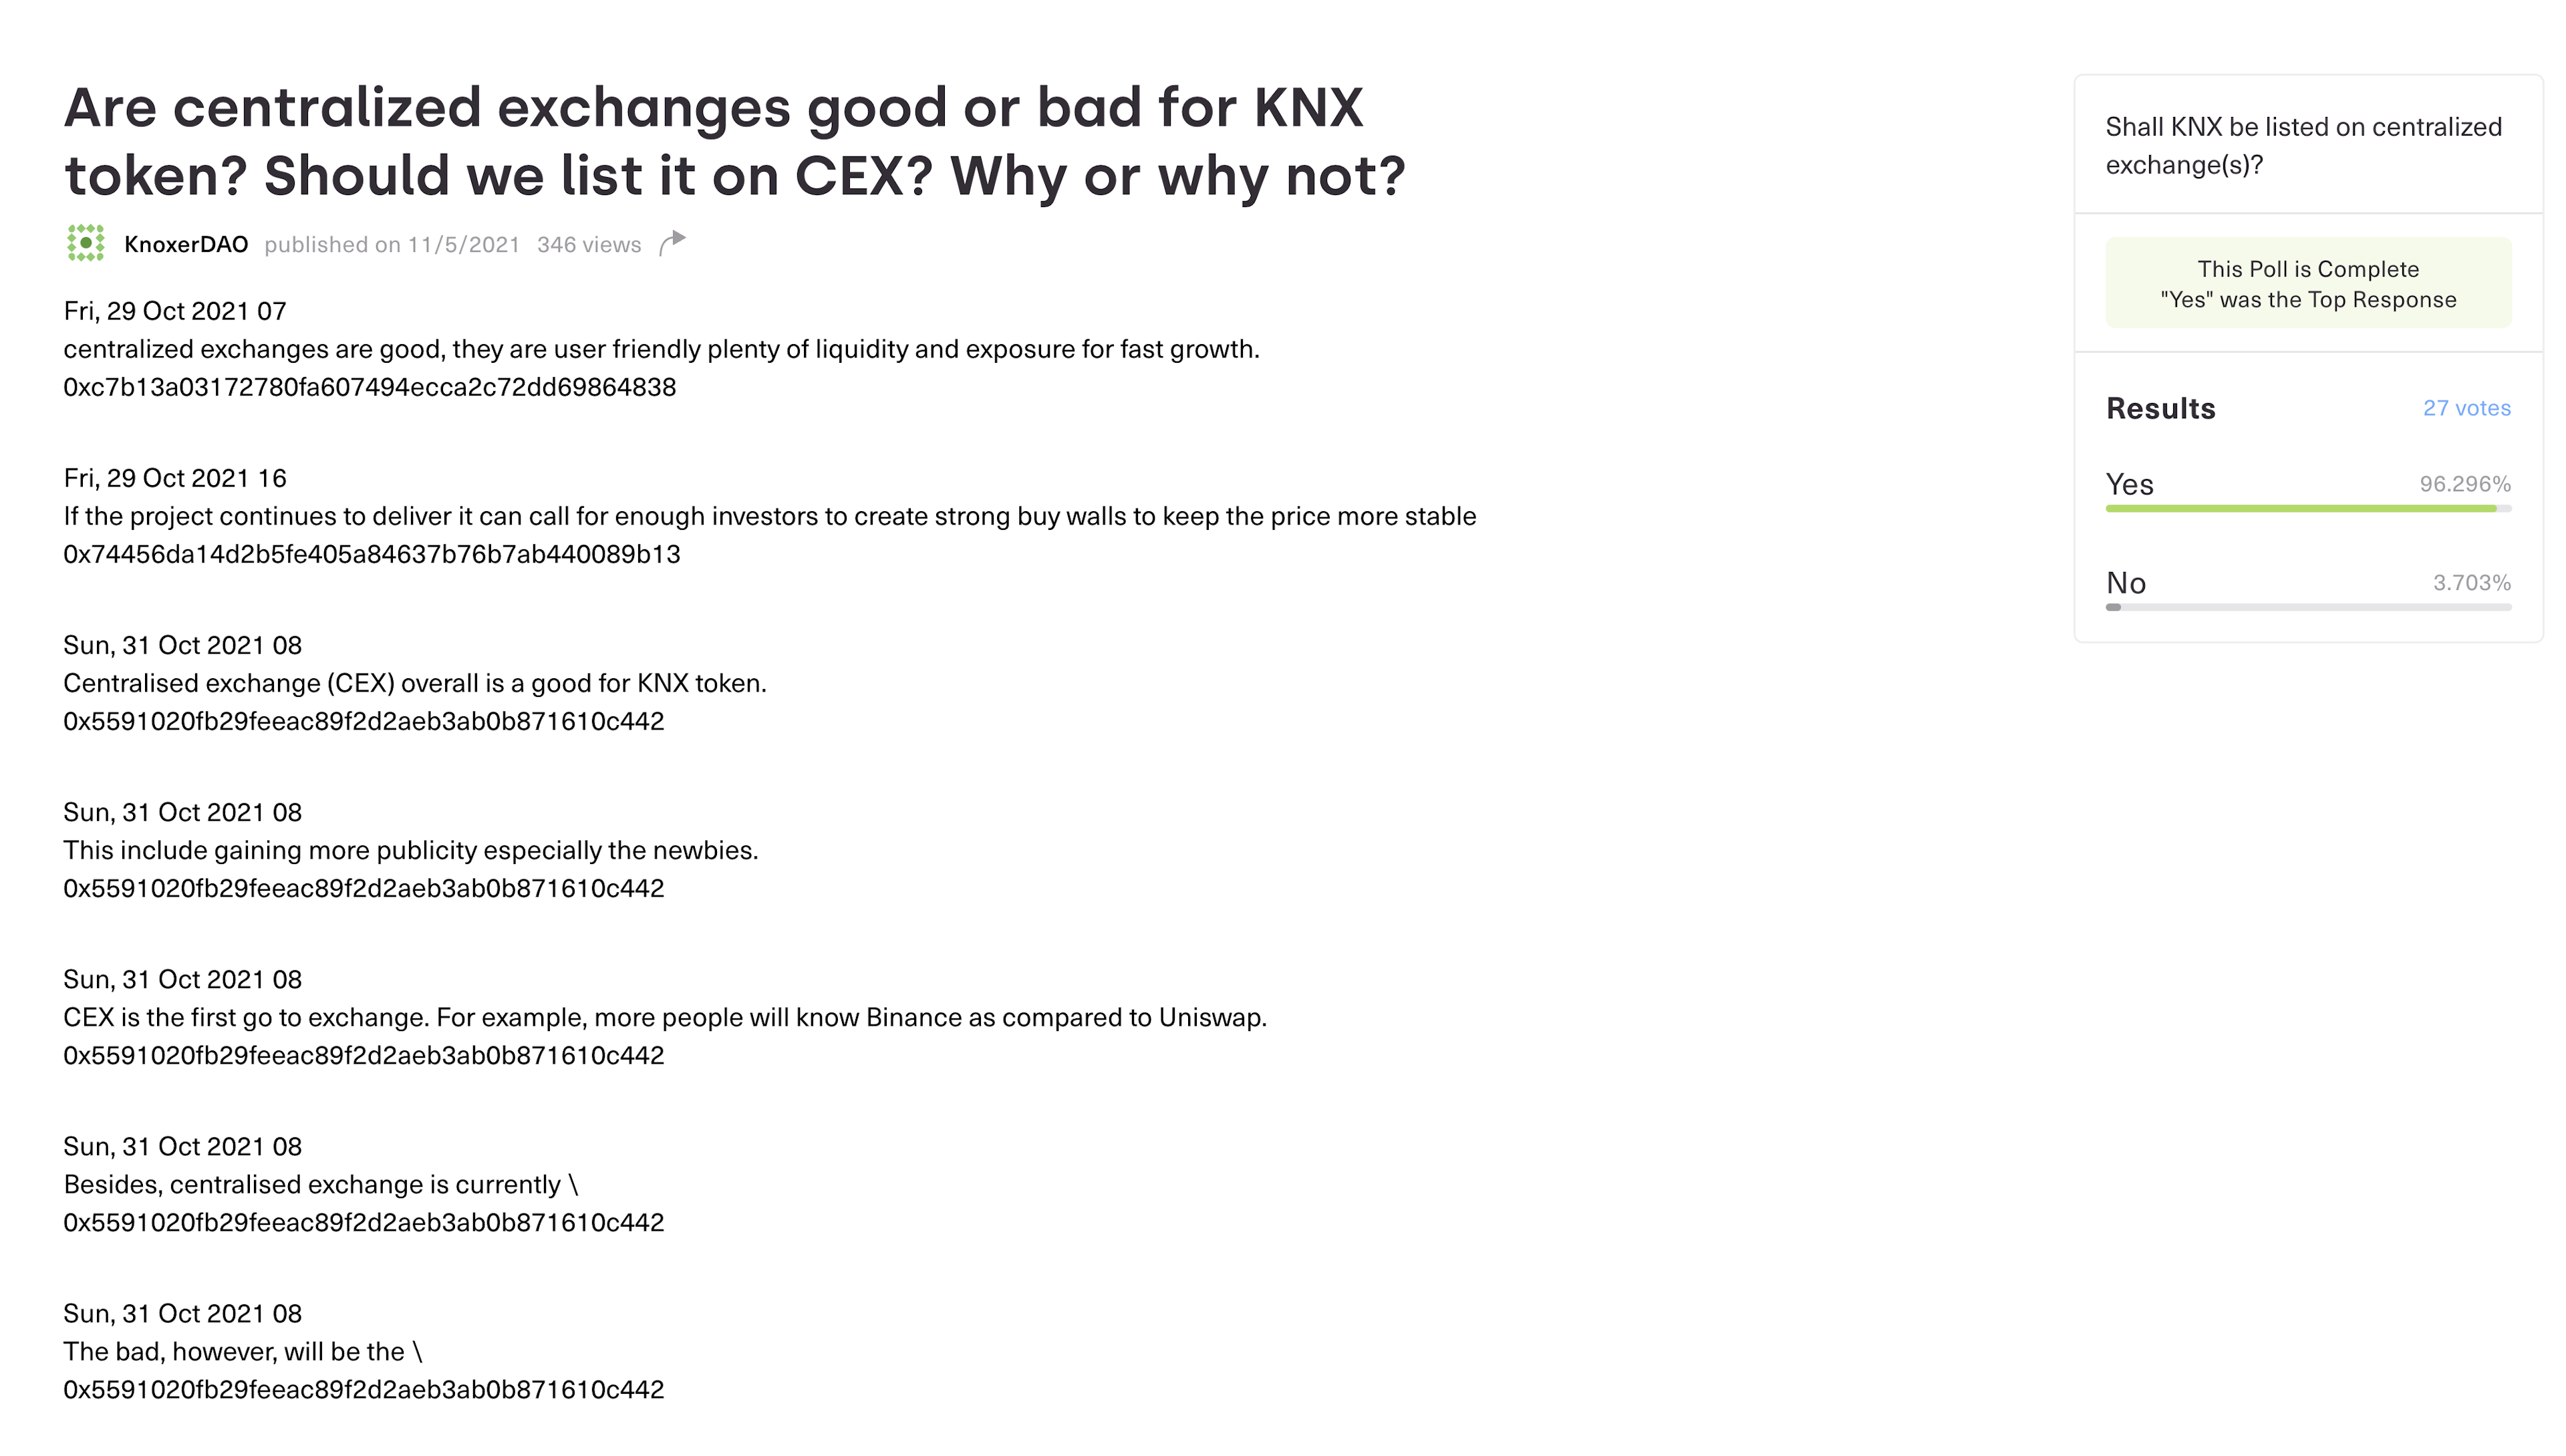 https://commonwealth.im/knoxedge/discussion/2484-are-centralized-exchanges-good-or-bad-for-knx-token-should-we-list-it-on-cex-why-or-why-not